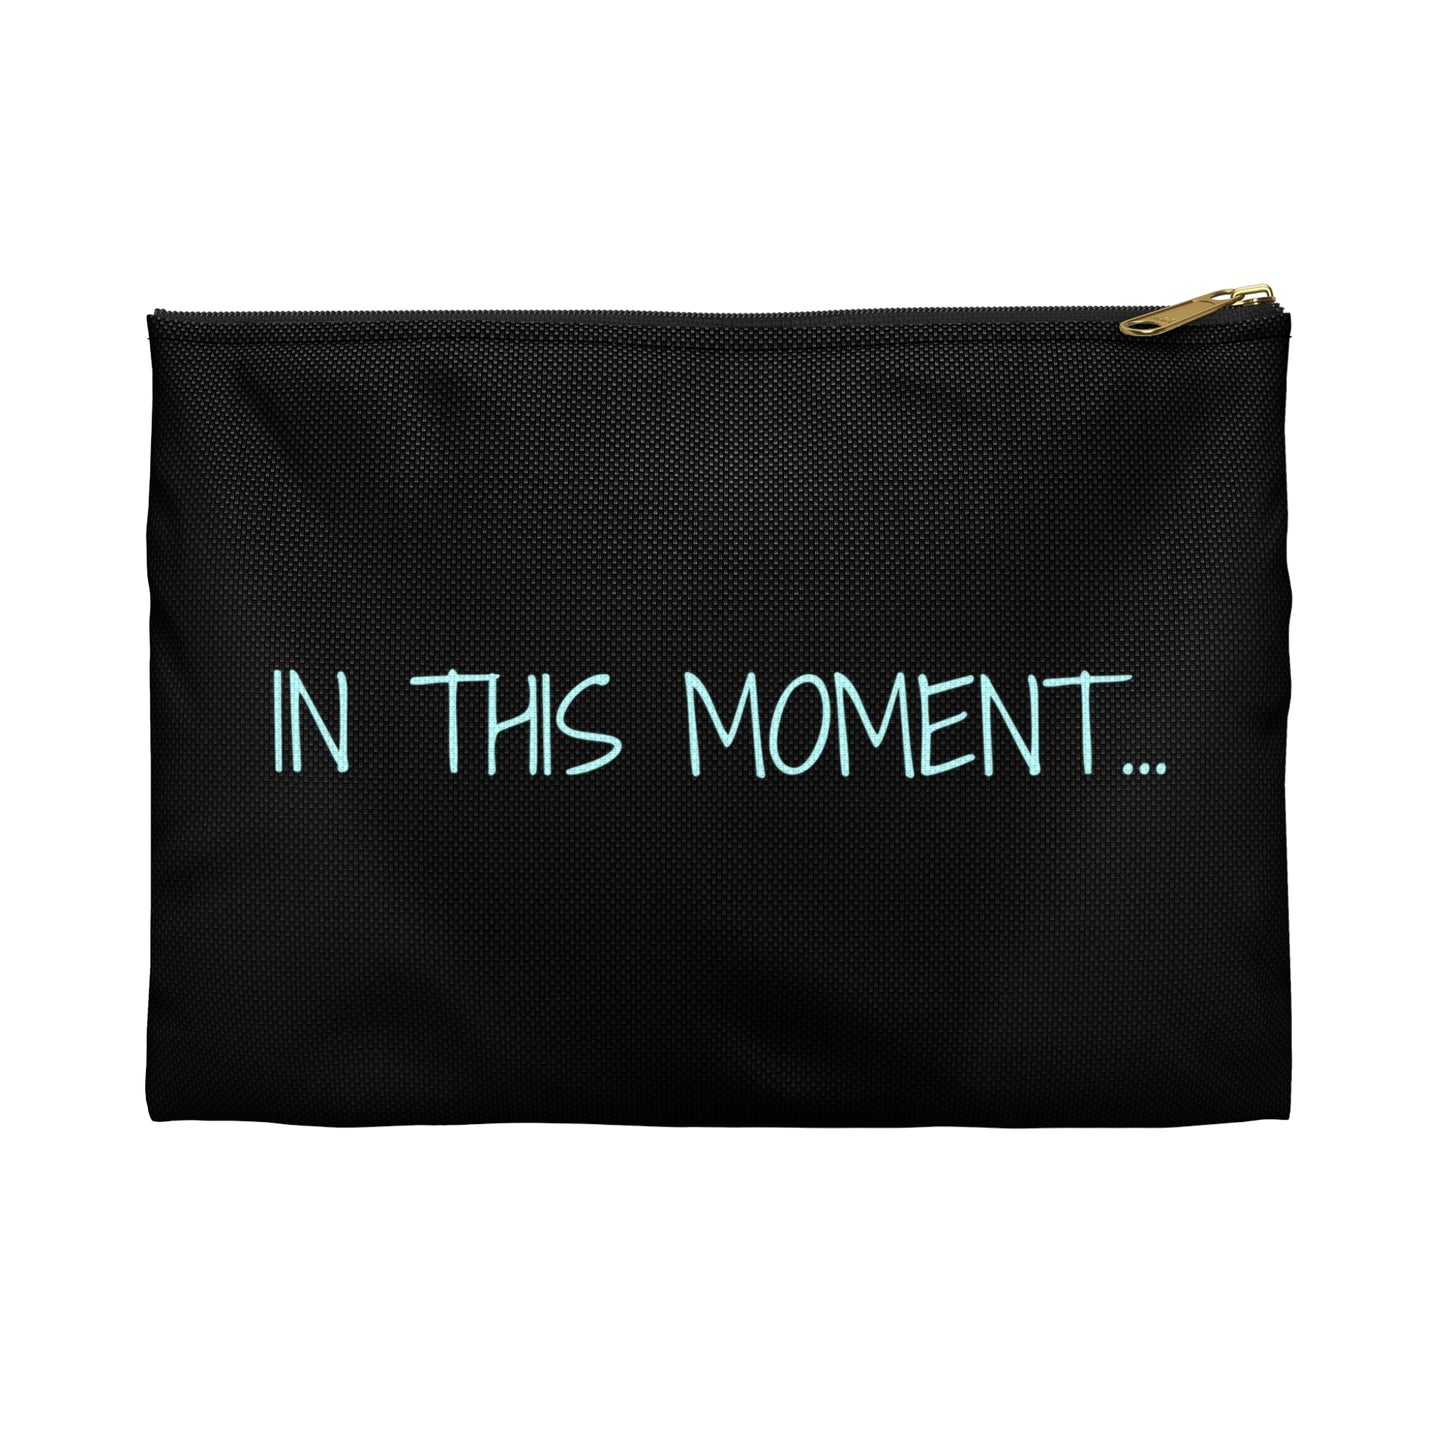 "IN THIS MOMENT WITH BLUE BURST" Accessory Pouches